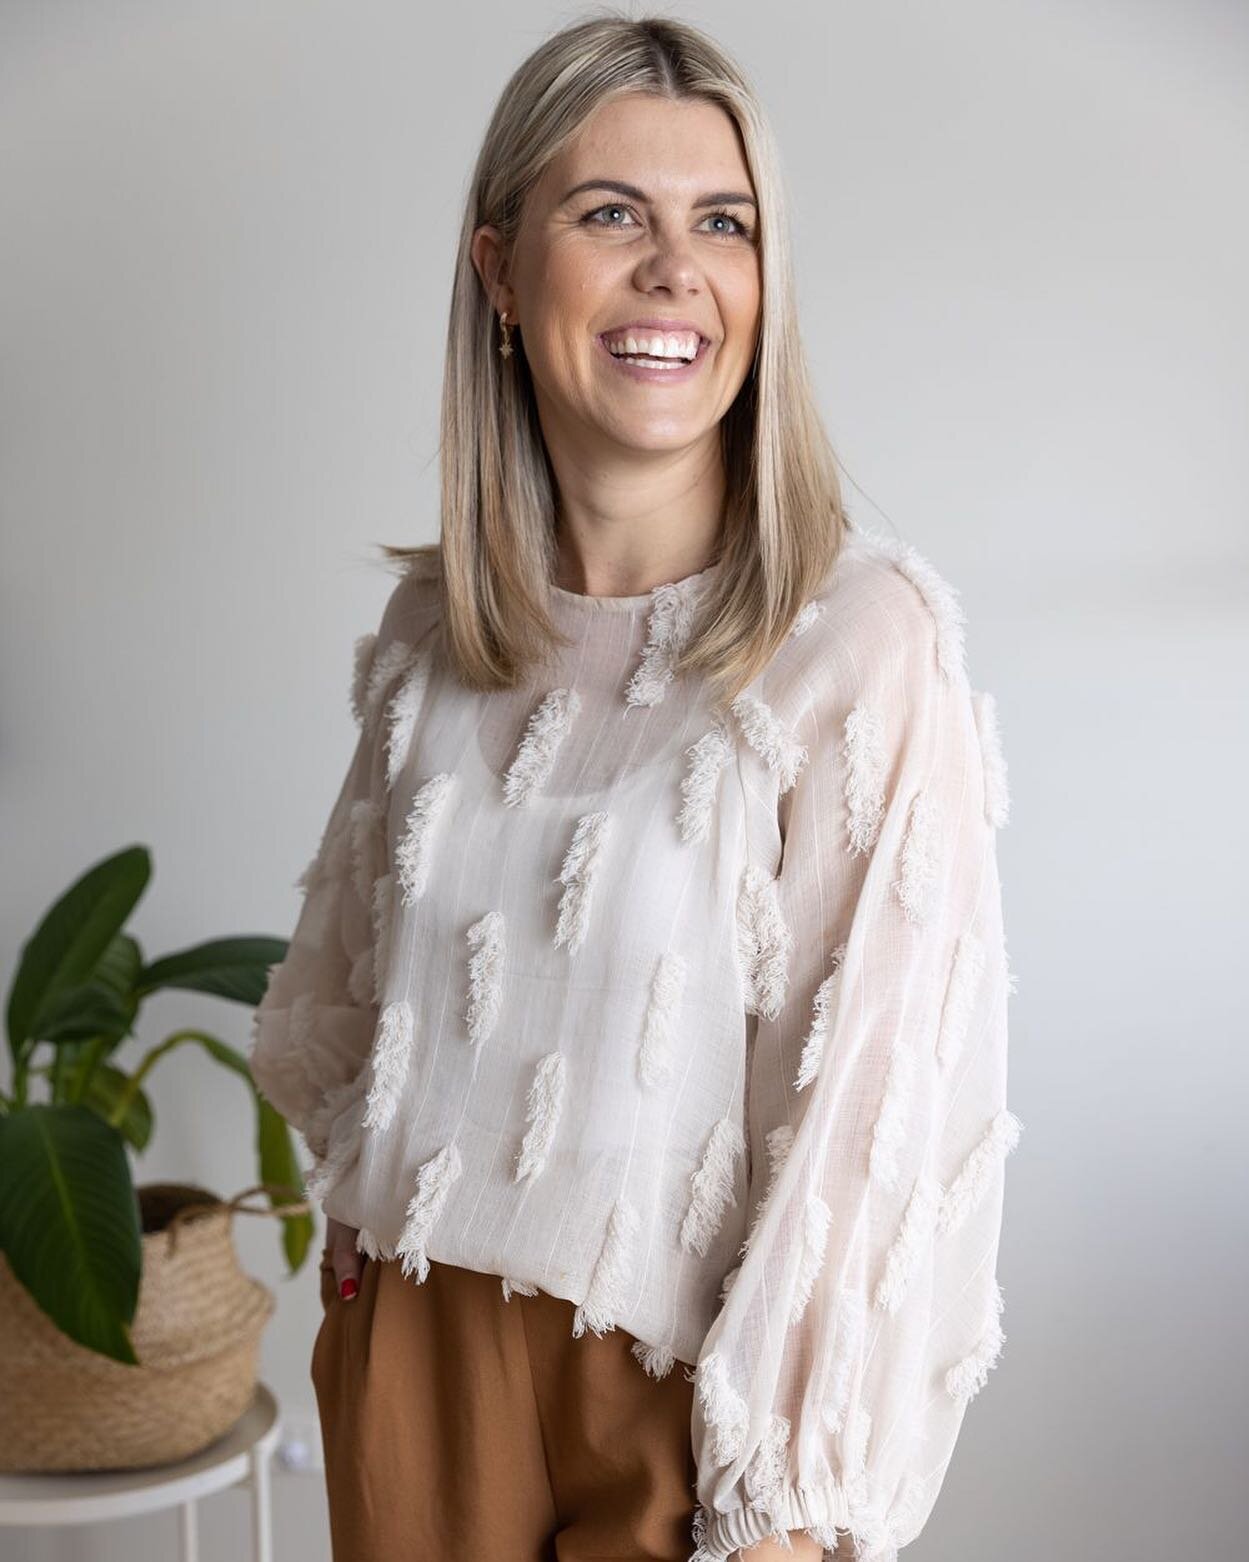 Working at home in ugg-boots and a scrunchie but you&rsquo;ll never know thanks to @brooke.Zotti&rsquo;s latest branding photoshoot! 

#brandshoot #canberrapr #canberra #canberrapublicrelations #branding #headshotscanberra